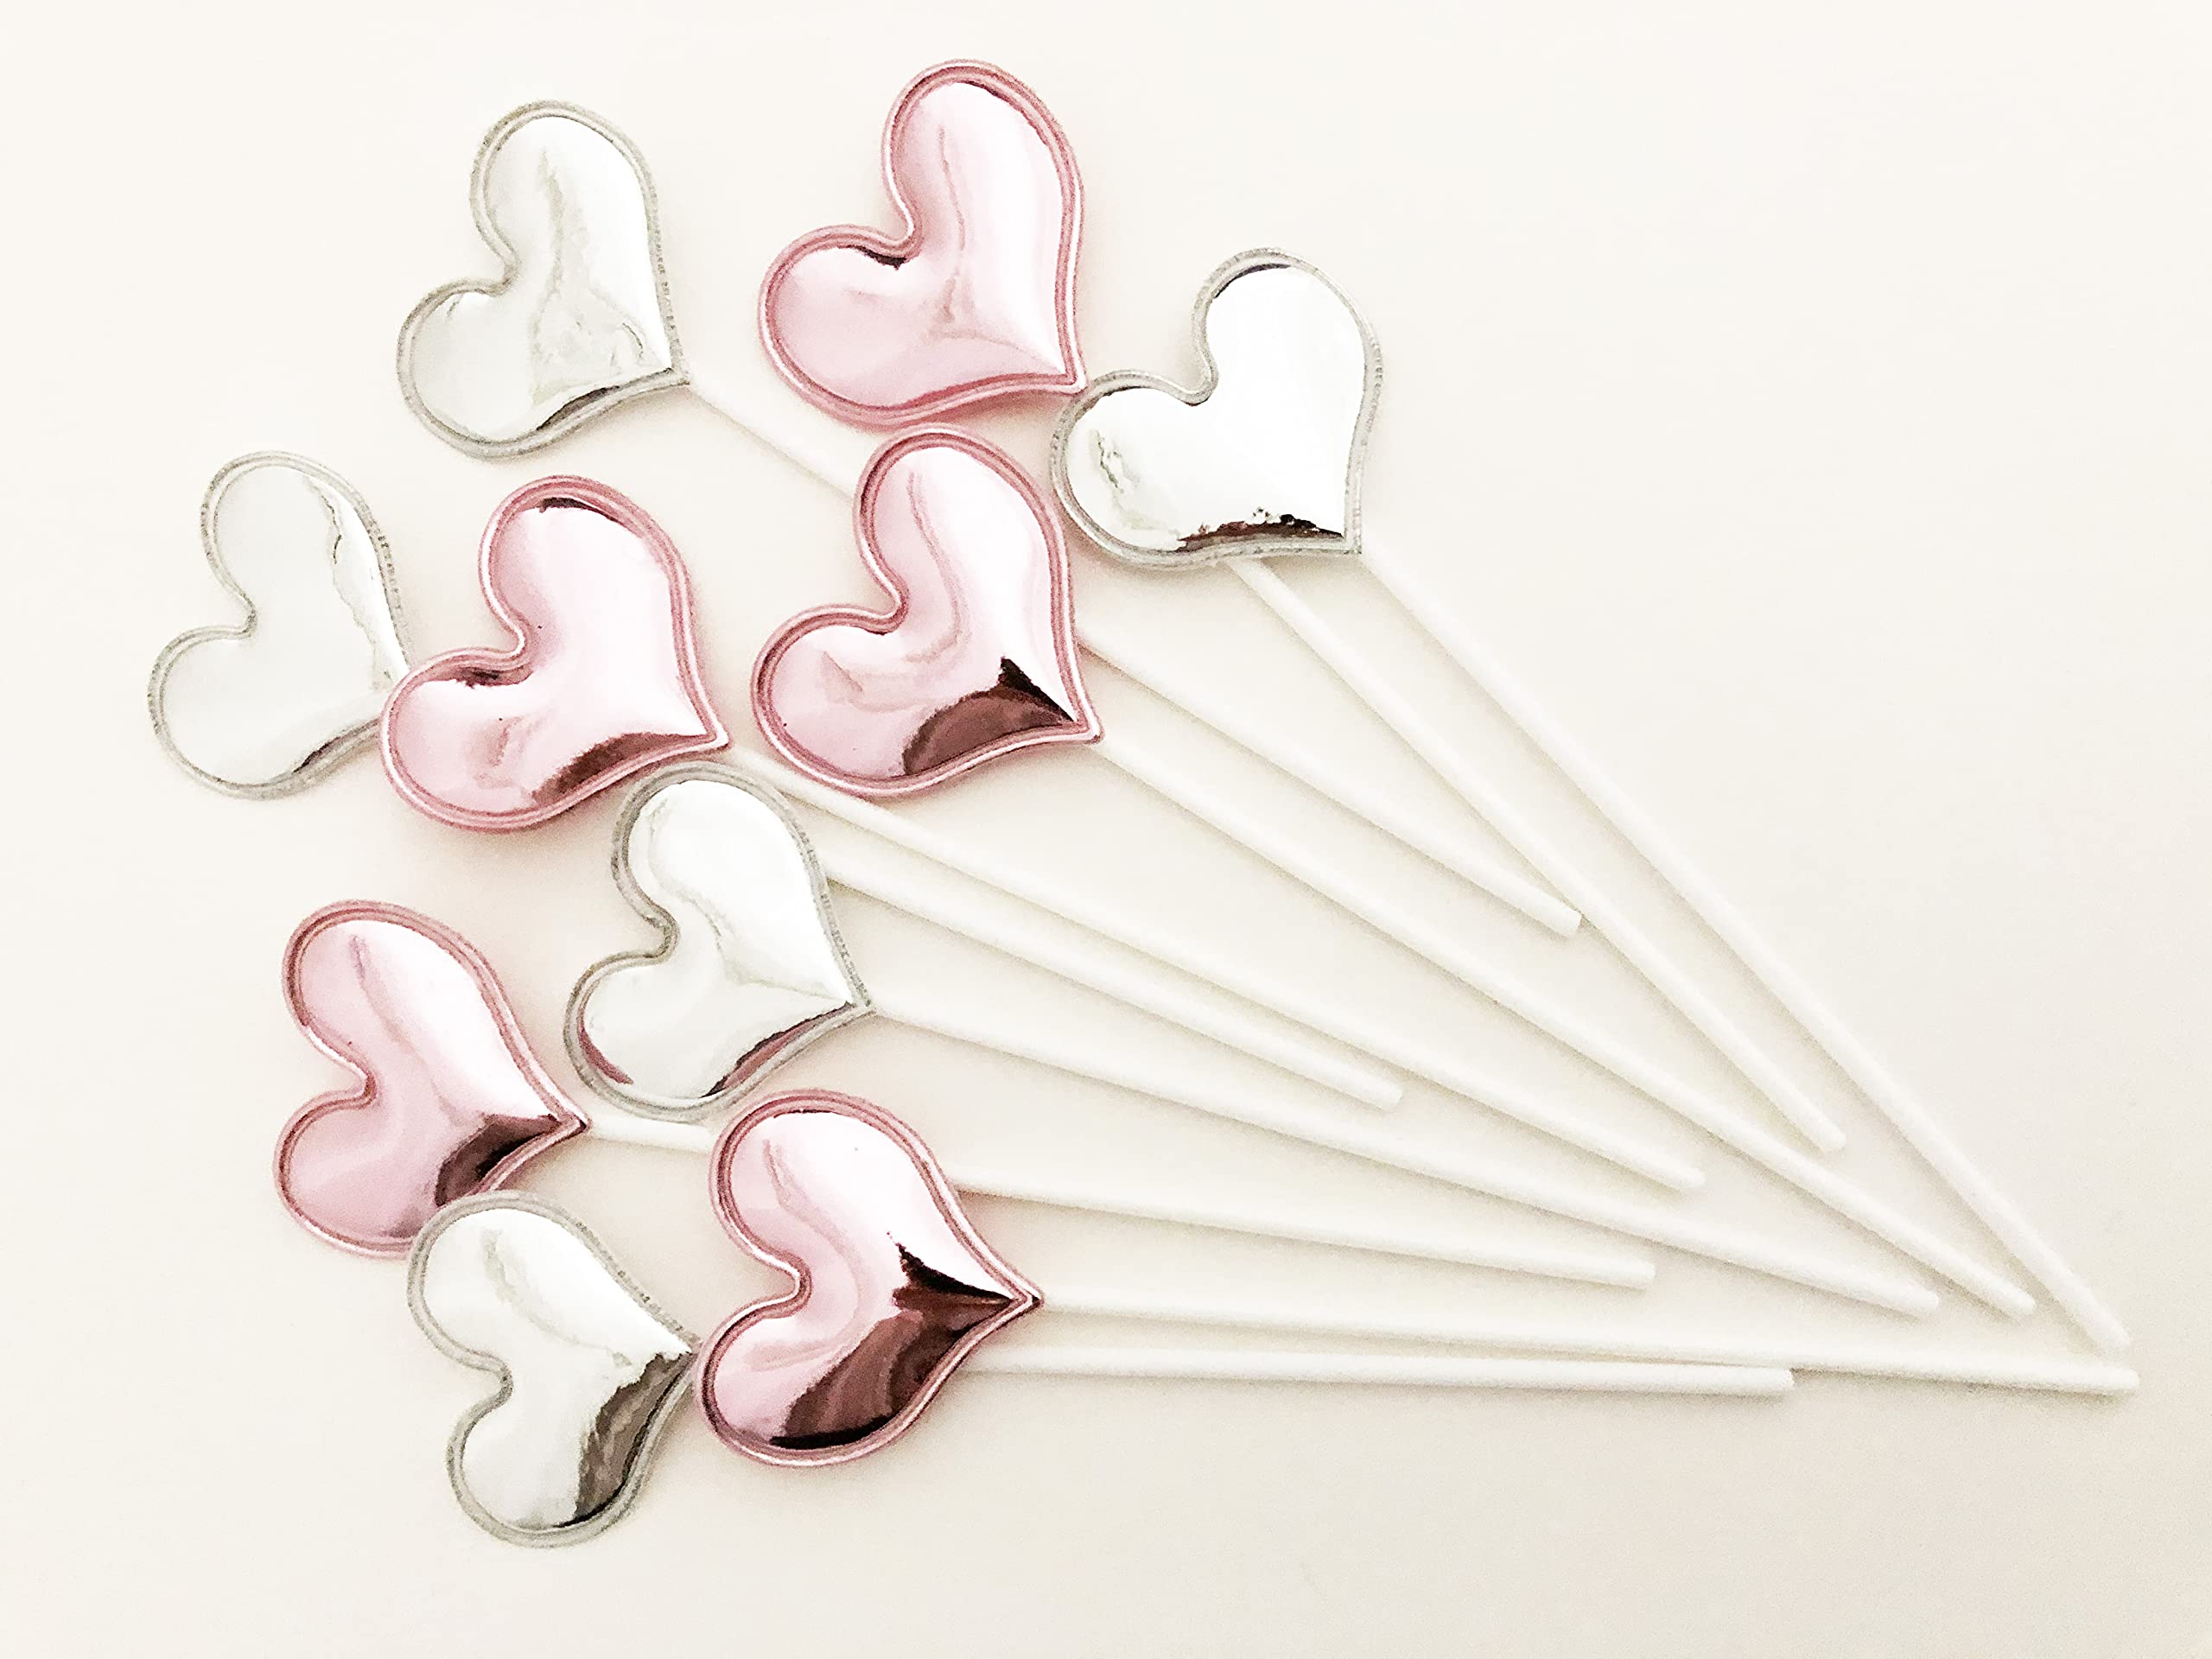 AILEXI Handmade 10 Counts Leather Reflective Glitter Cake Decorating Toppers for cake cupcake and icecream - 5 pink and 5 Silver Hearts